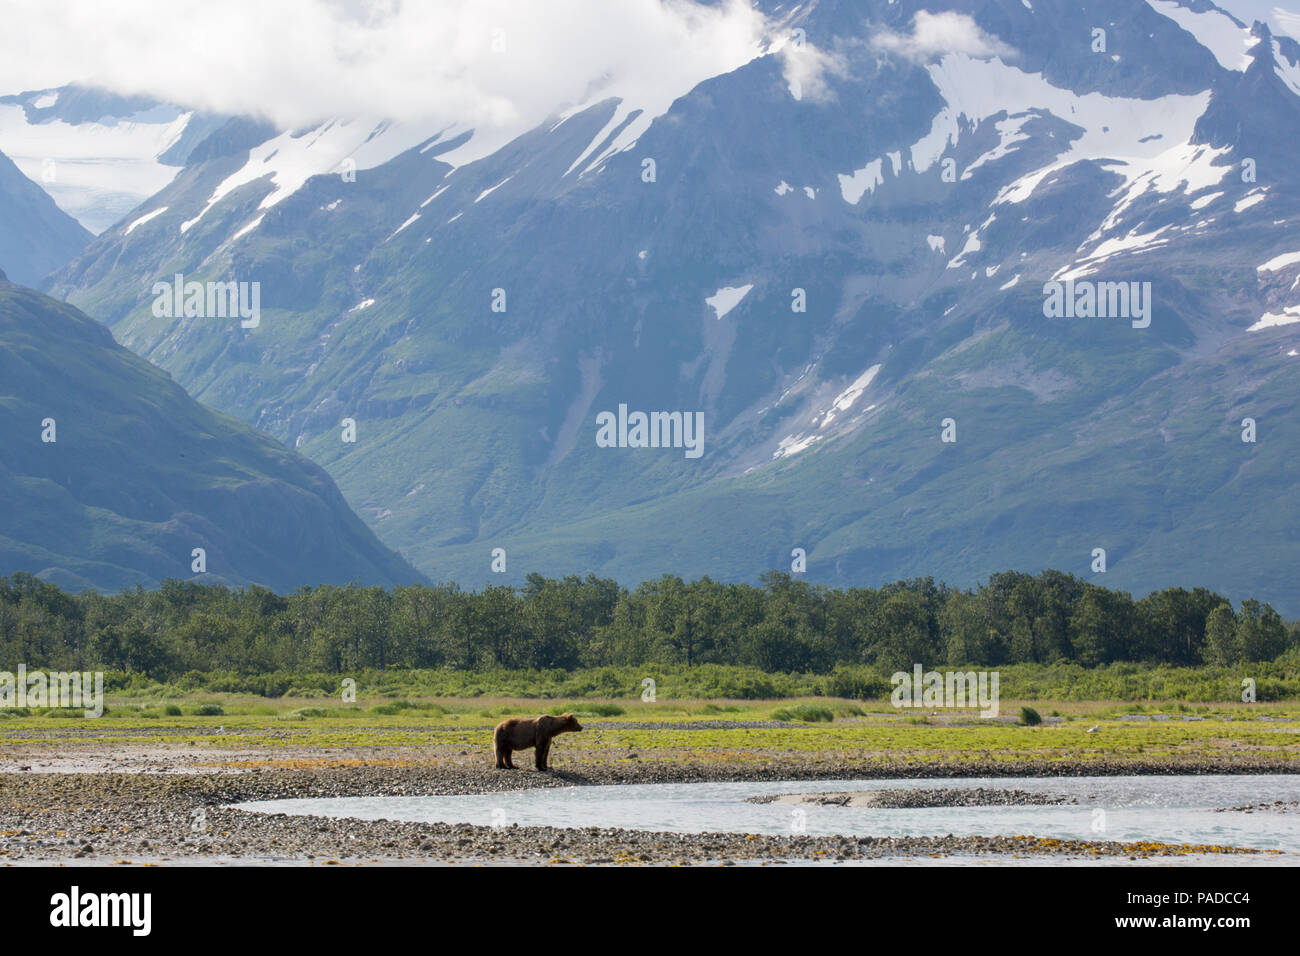 Orso bruno (costiere Grizzly) in Katmai National Park, Alaska Foto Stock